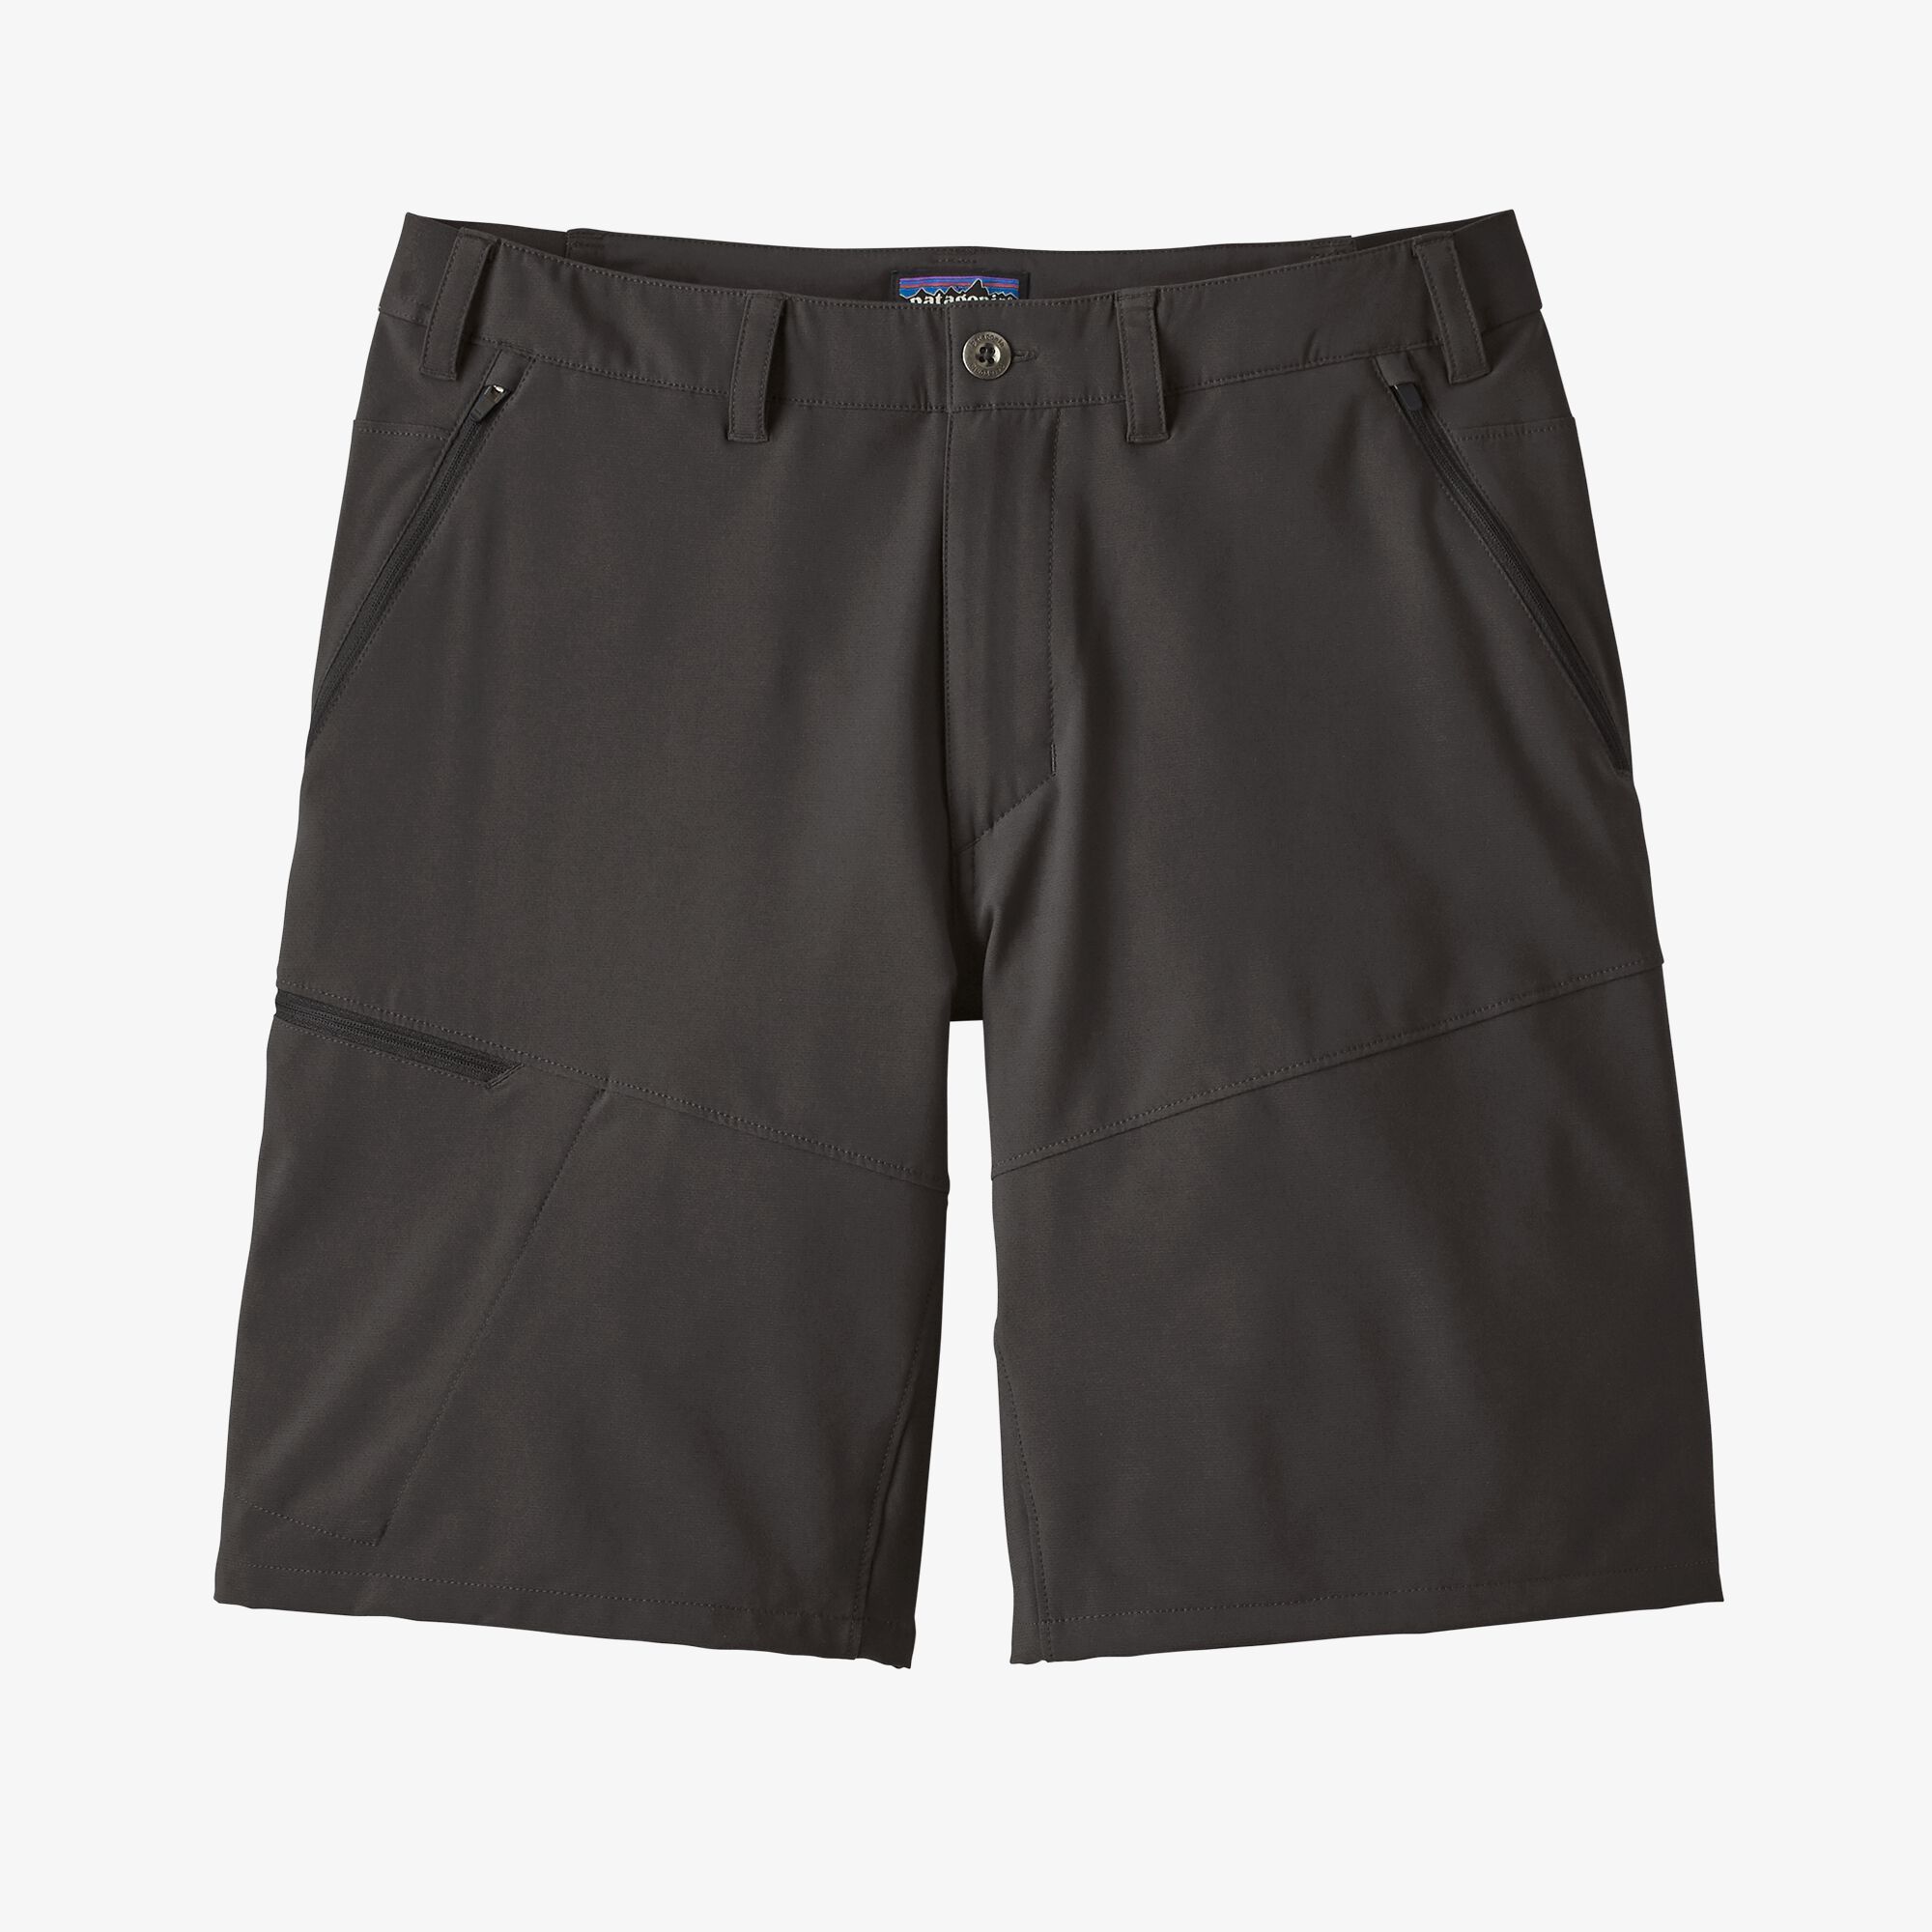 Patagonia Men's Altvia Trail Shorts - 10" - Recycled Polyester, Black / 32